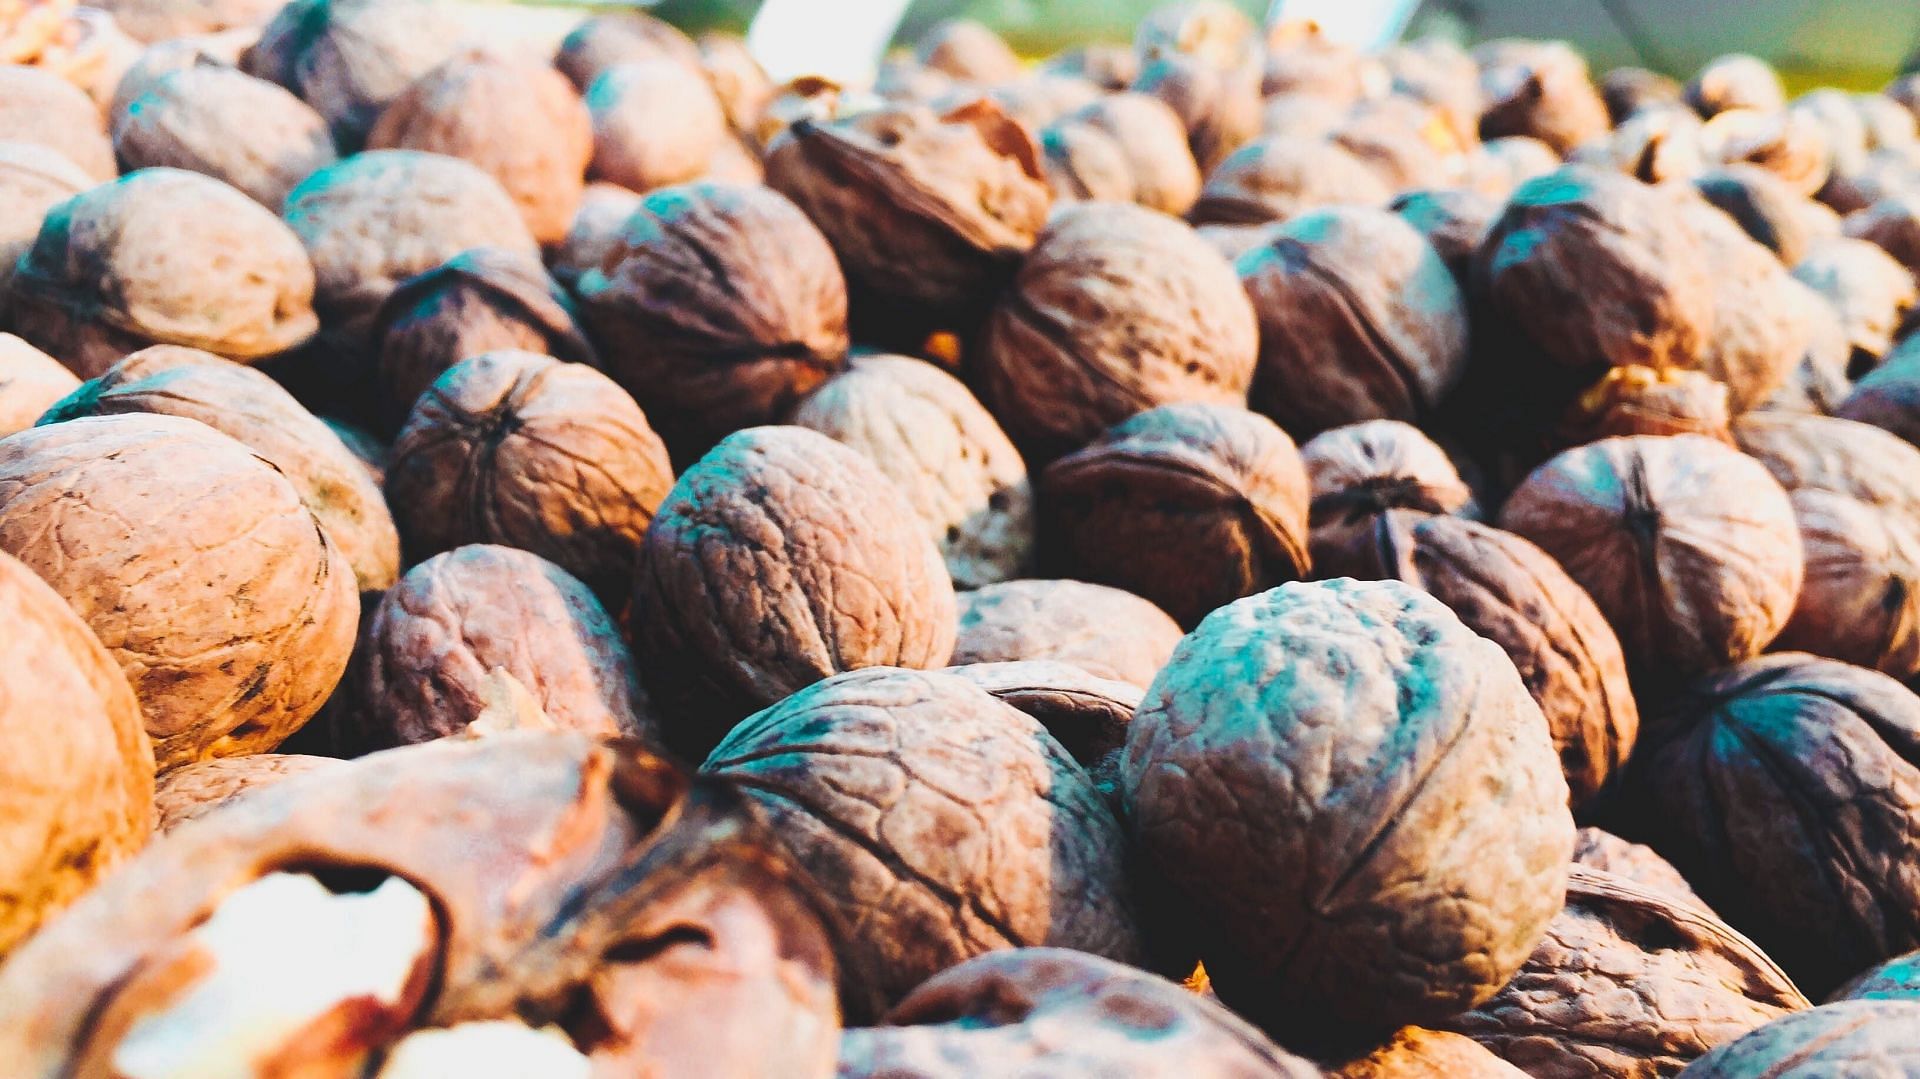 Importance of walnuts on empty stomach (image sourced via Pexels / Photo by kllpa)